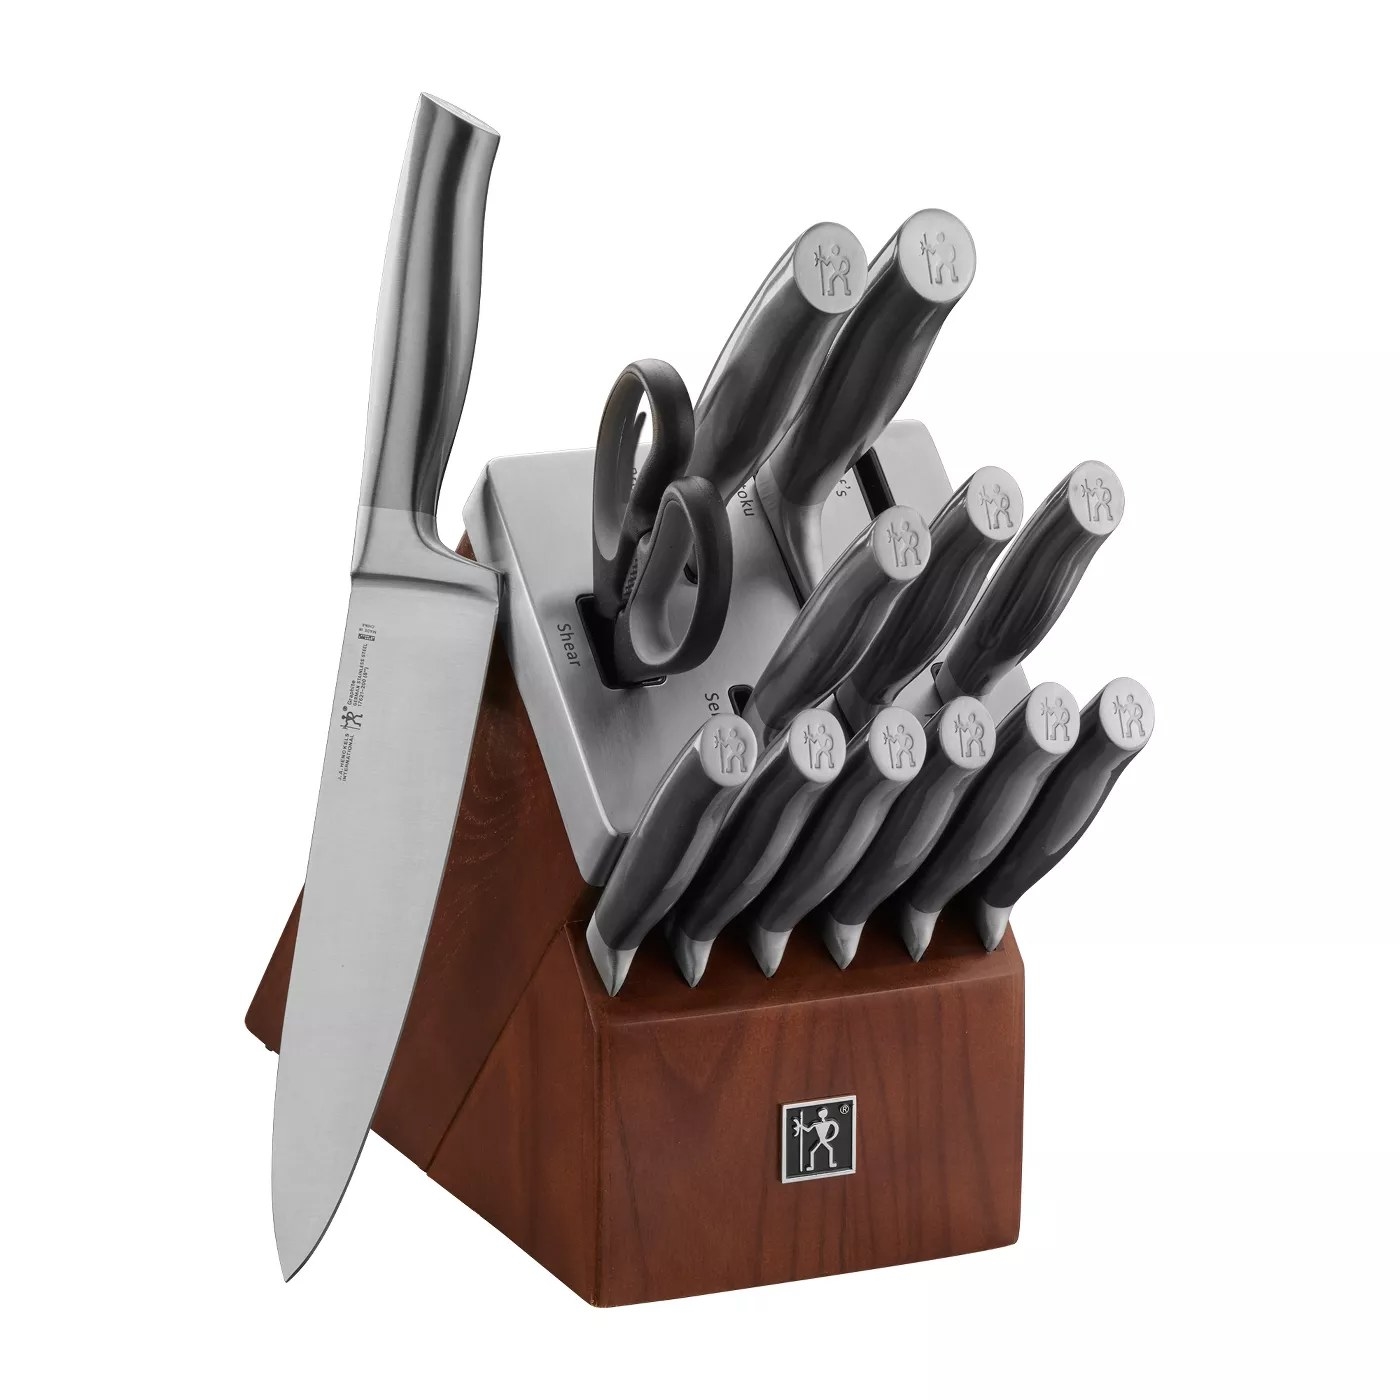 The Henckels knife set and accompanying knives